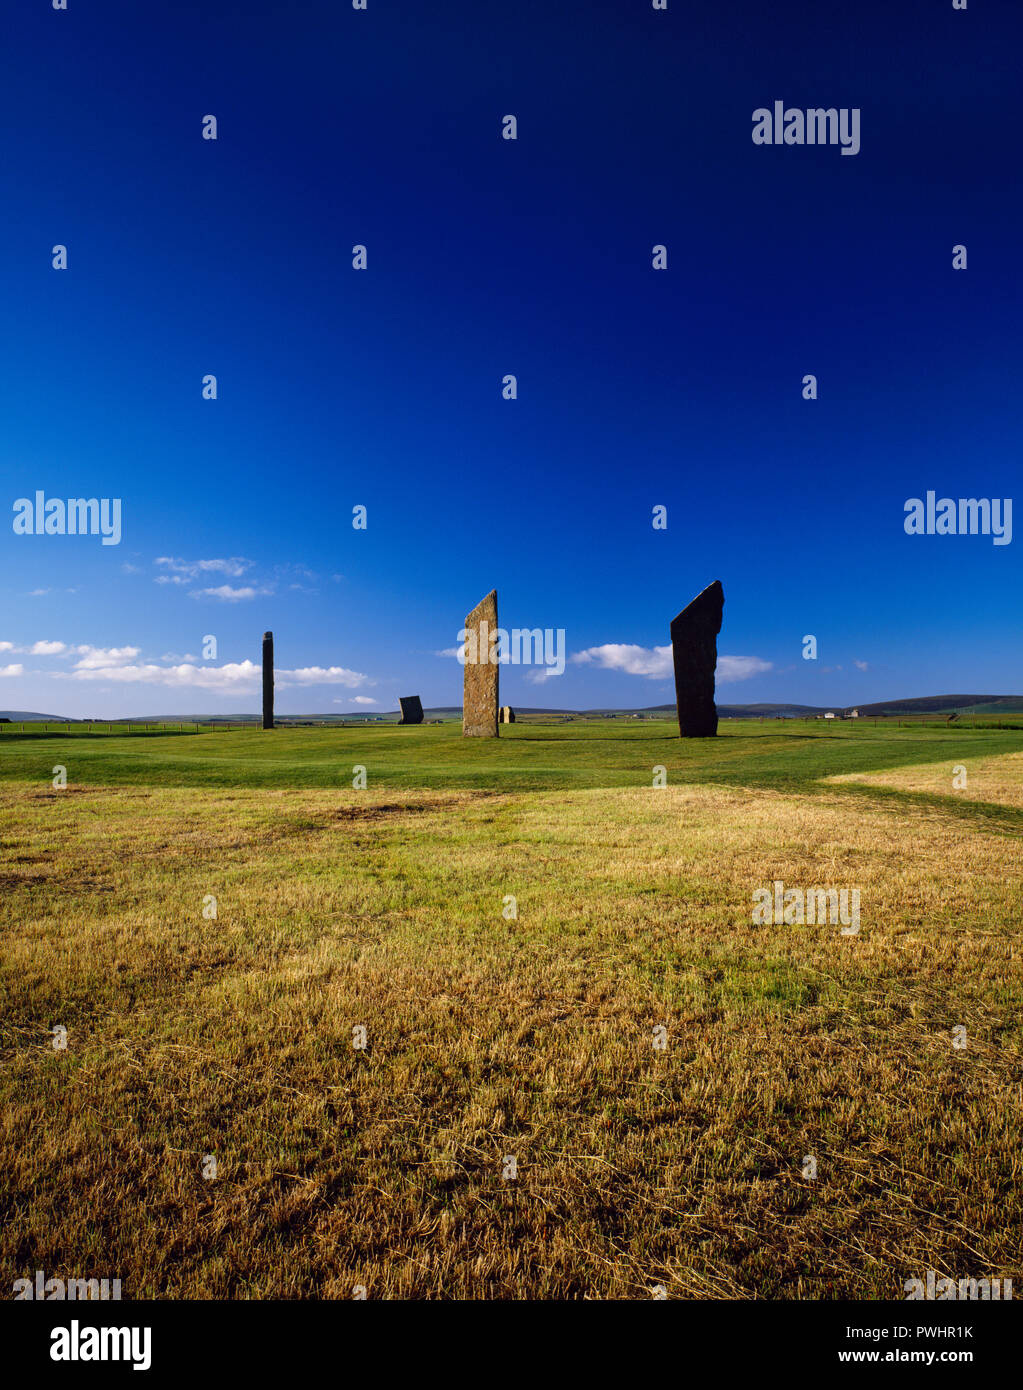 View NNE showing the Stones of Stenness stone circle, Orkney, Scotland, UK, standing within the remains of a circular earthwork henge monument. Stock Photo